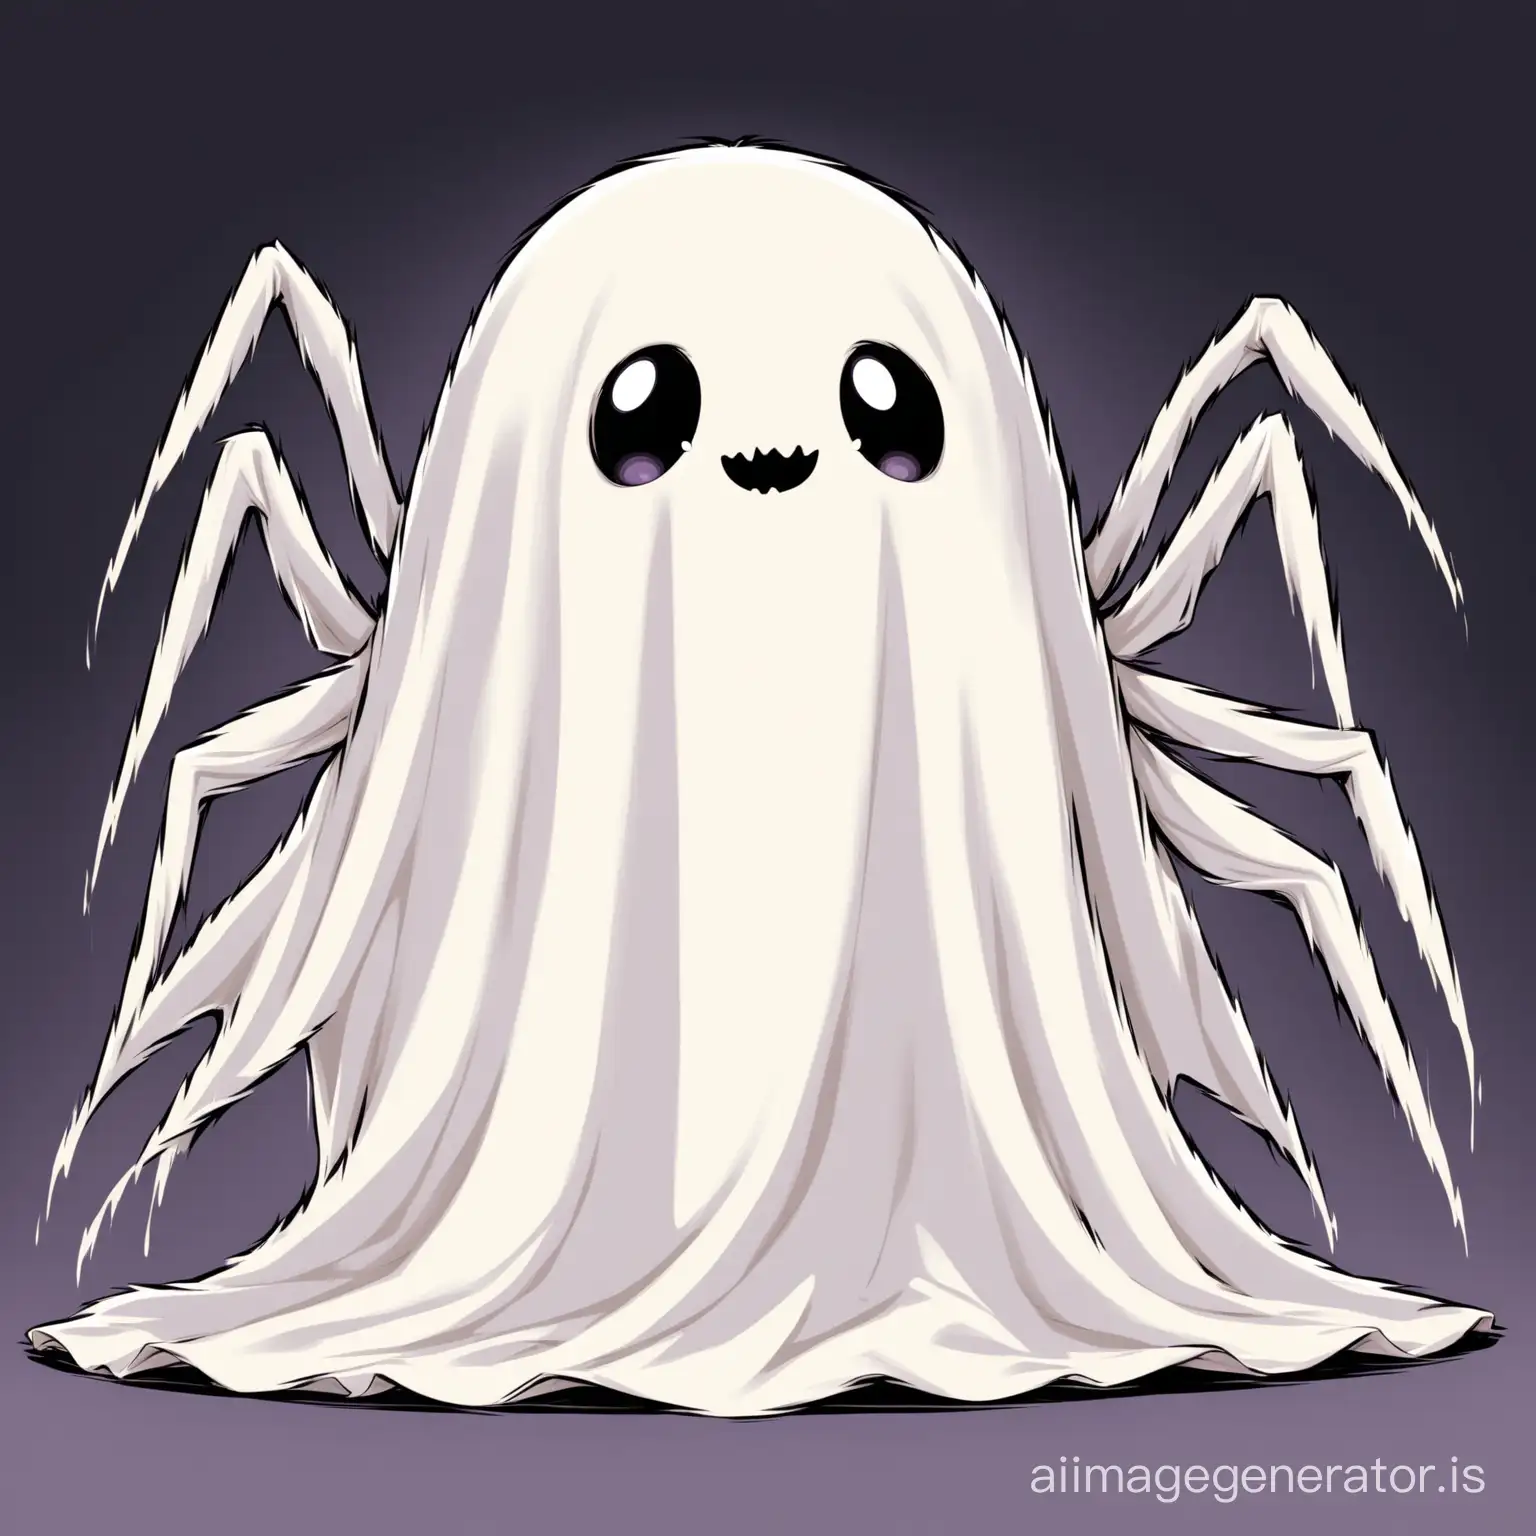 A cute spider with 8 legs wearing a bed sheet as a ghost Halloween costume